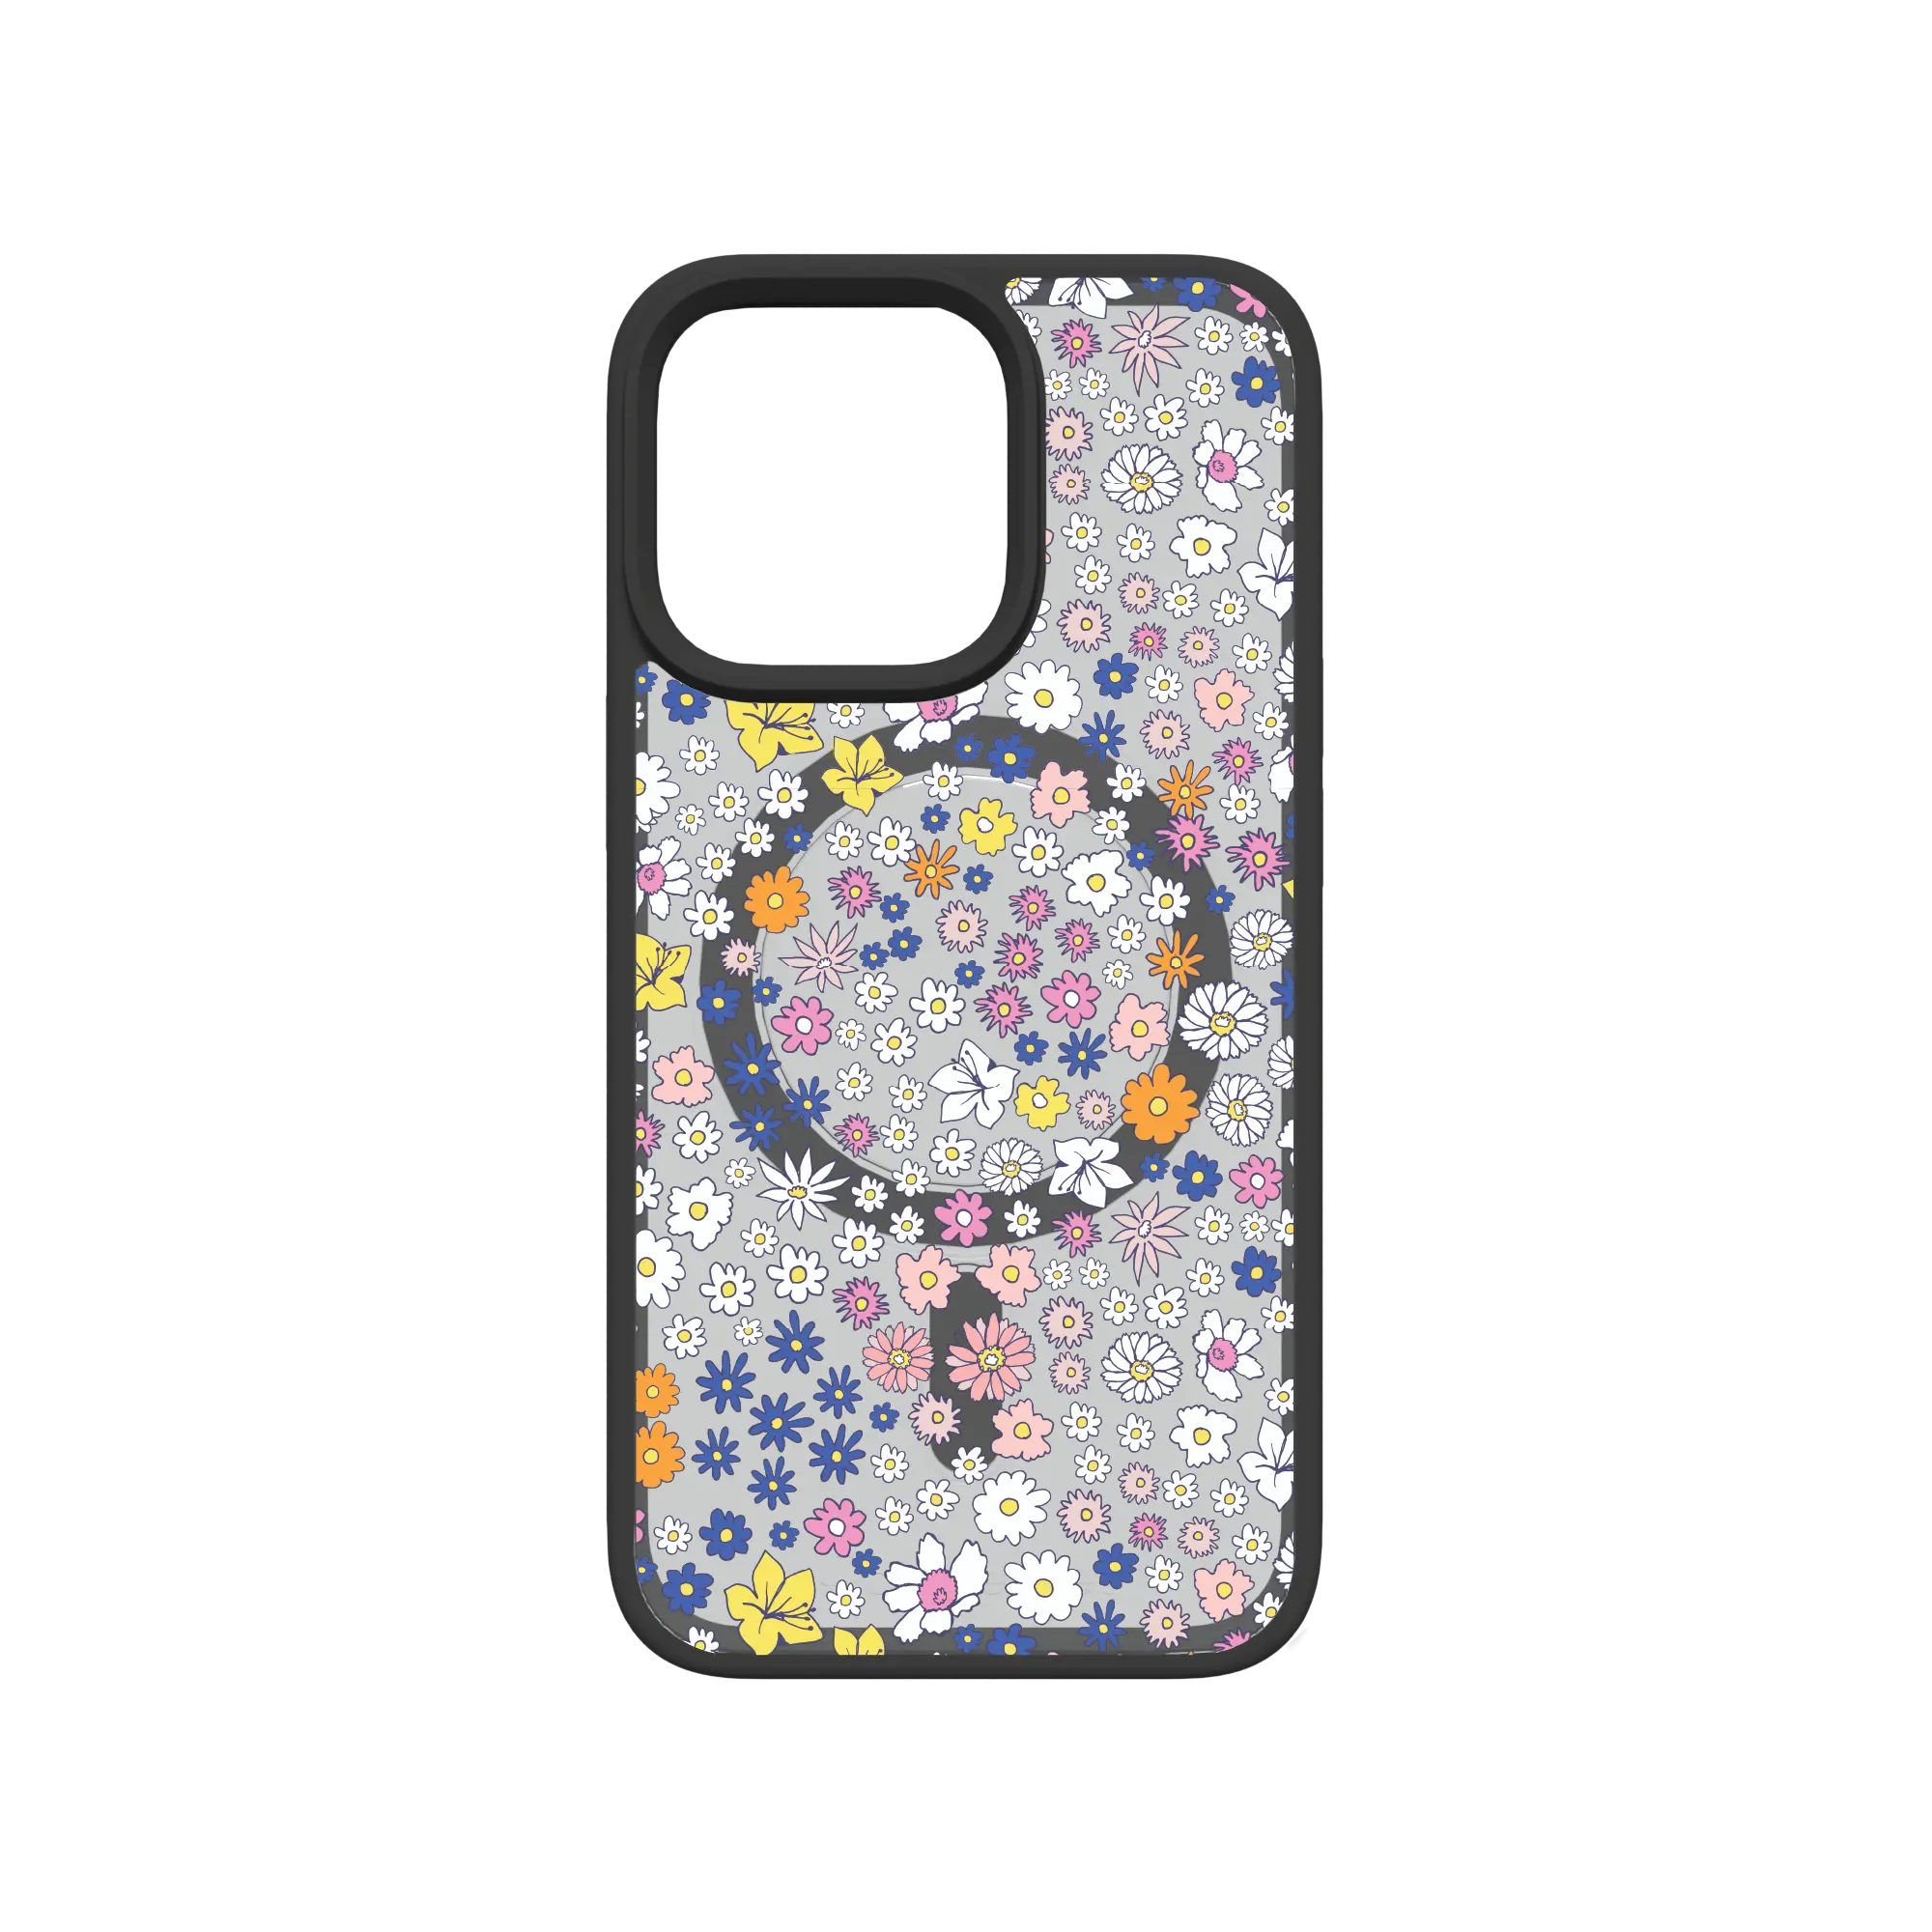 Apple-iPhone-13-Pro-Crystal-Clear Wild Blossom | Protective MagSafe Case | Flower Series for Apple iPhone 13 Series cellhelmet cellhelmet